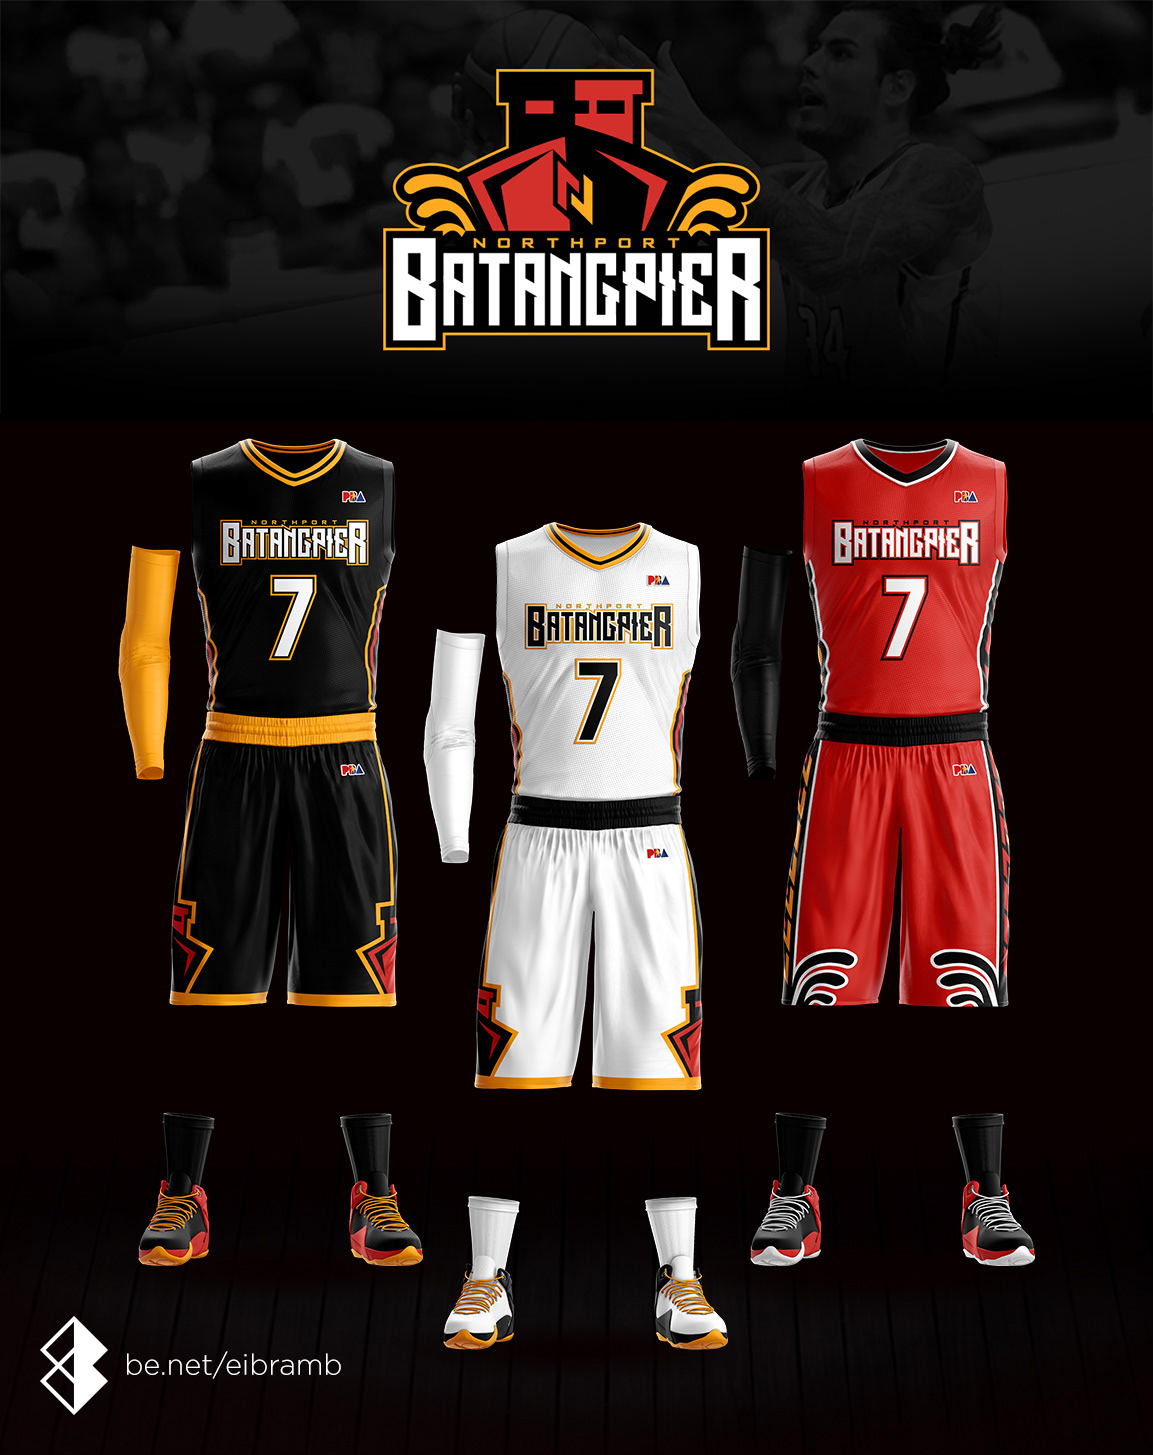 PBA Jersey Redesigns (Concept) on Behance